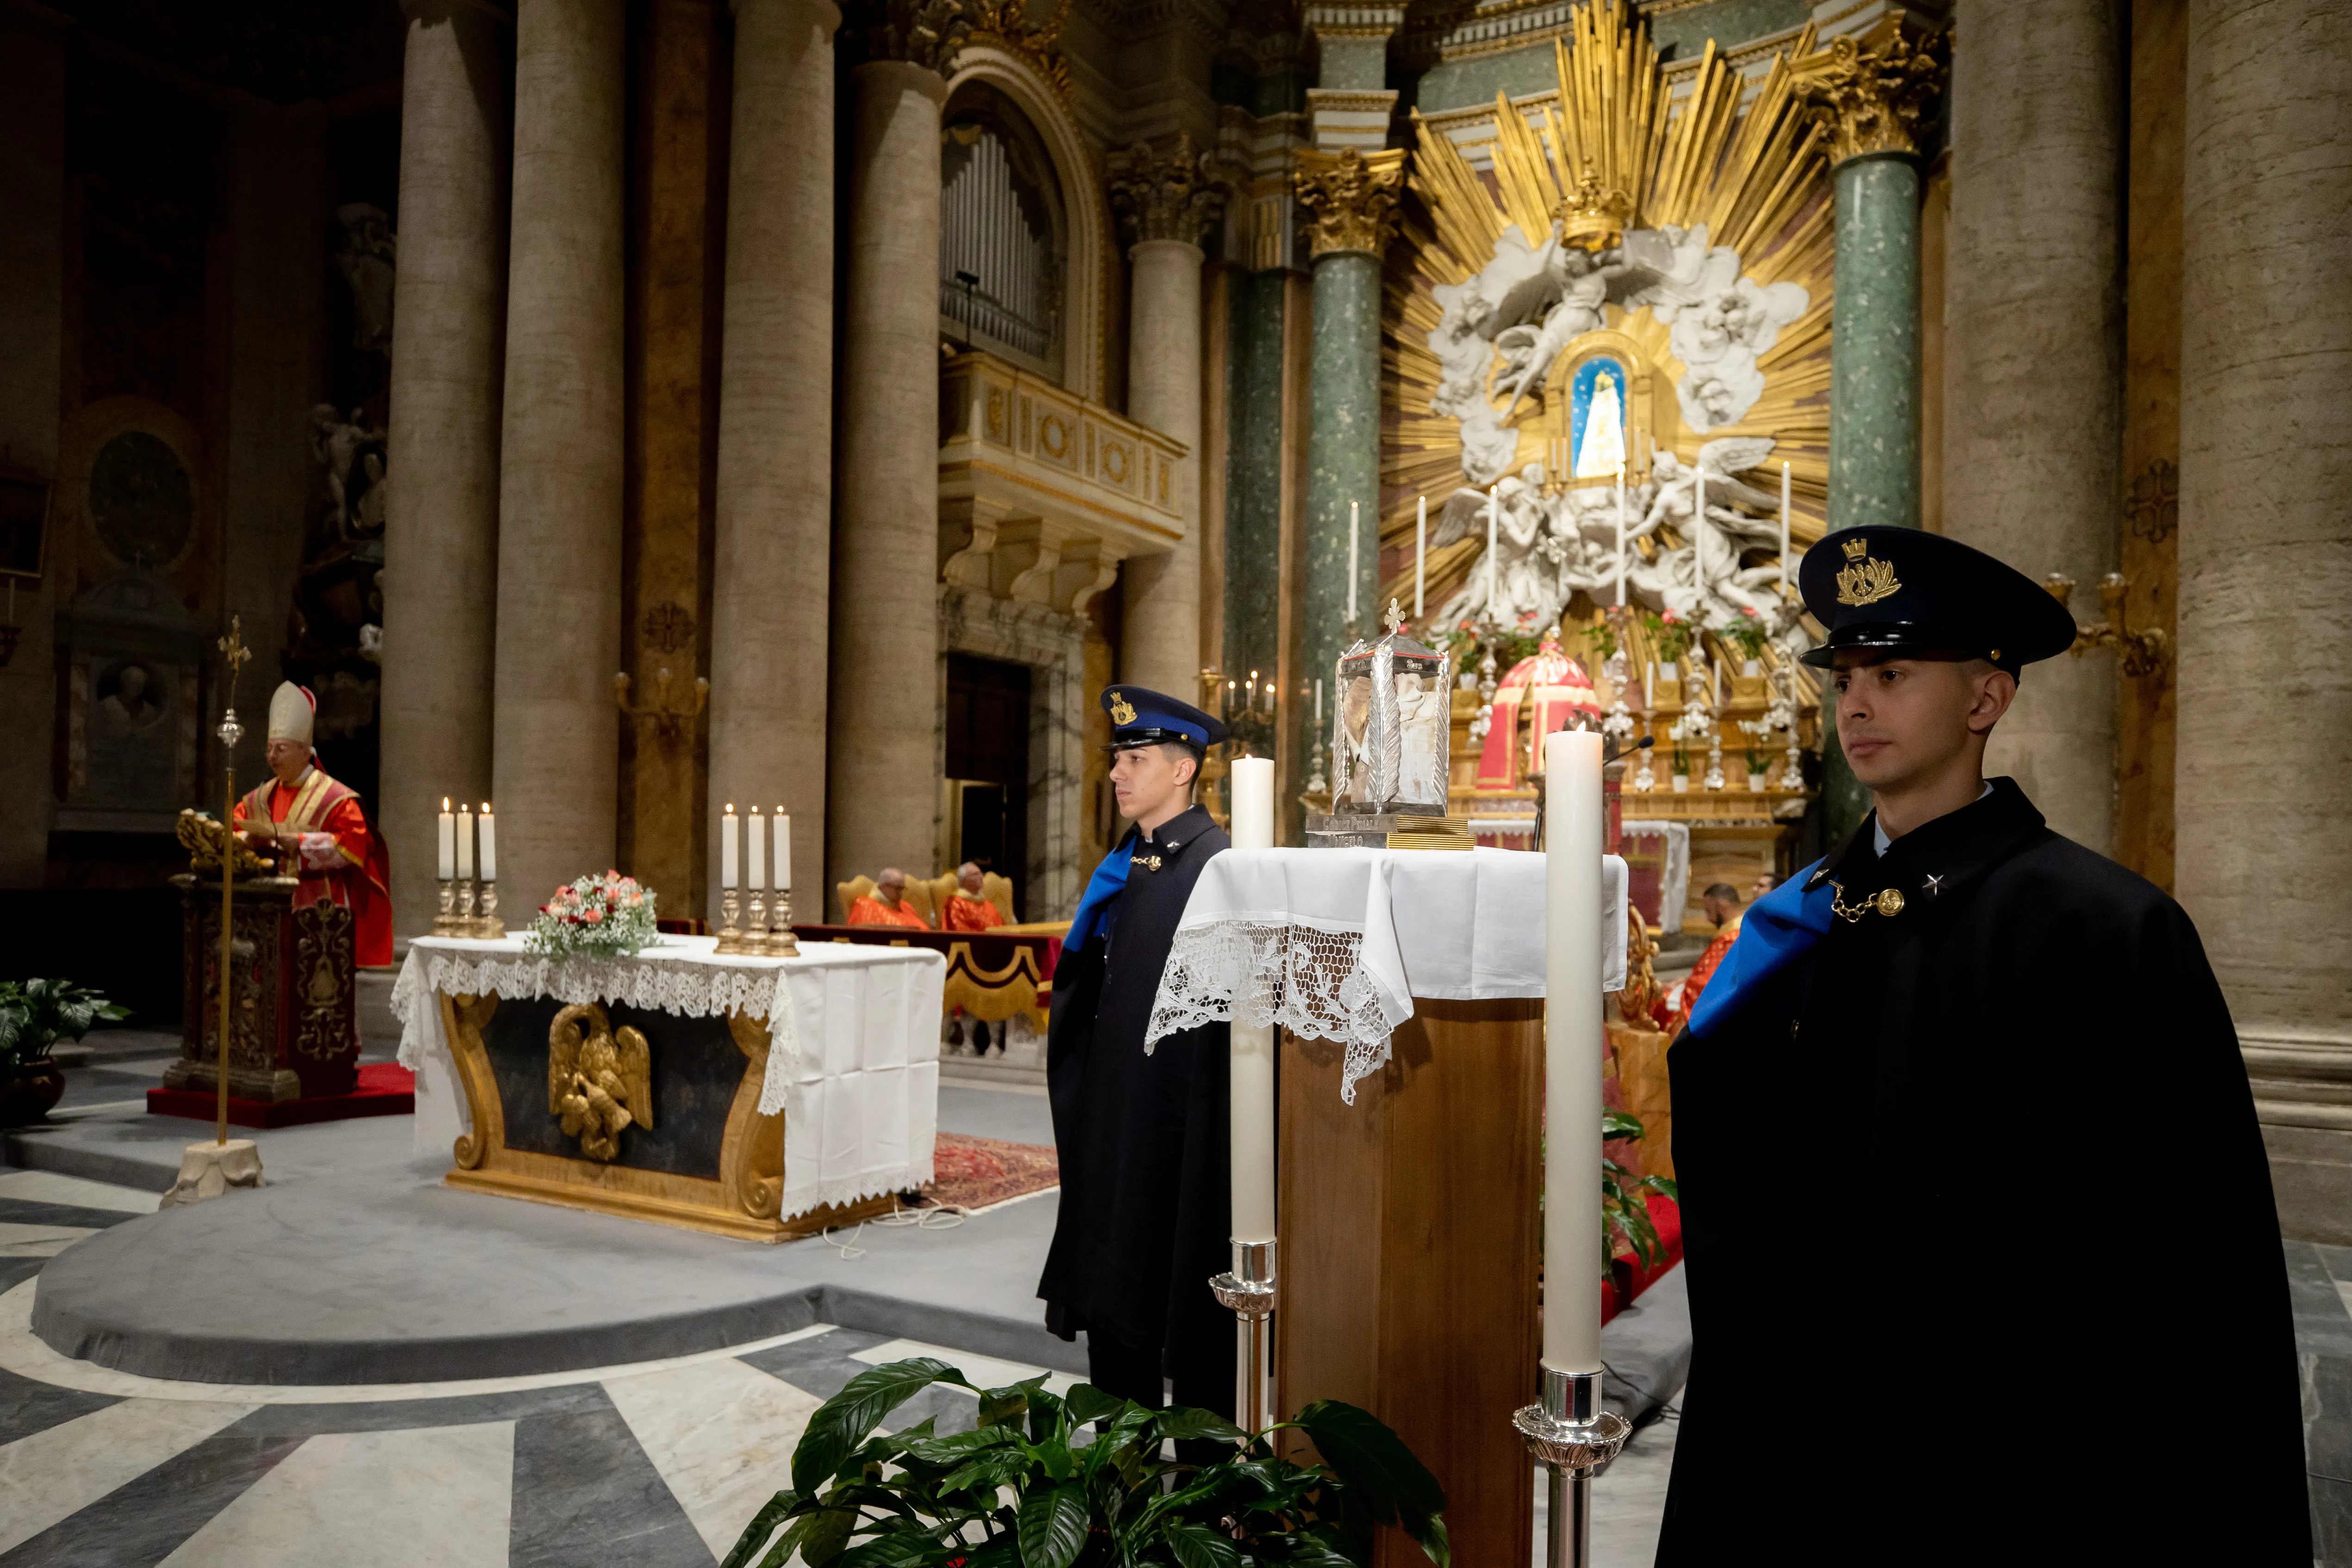 Cardinal Dominique Mamberti presides at a ceremony and Mass at the Church of San Salvatore in Lauro, Rome, where a relic of Blessed Rosario Livatino was displayed Jan. 20, 2023. Daniel Ibañez/CNA